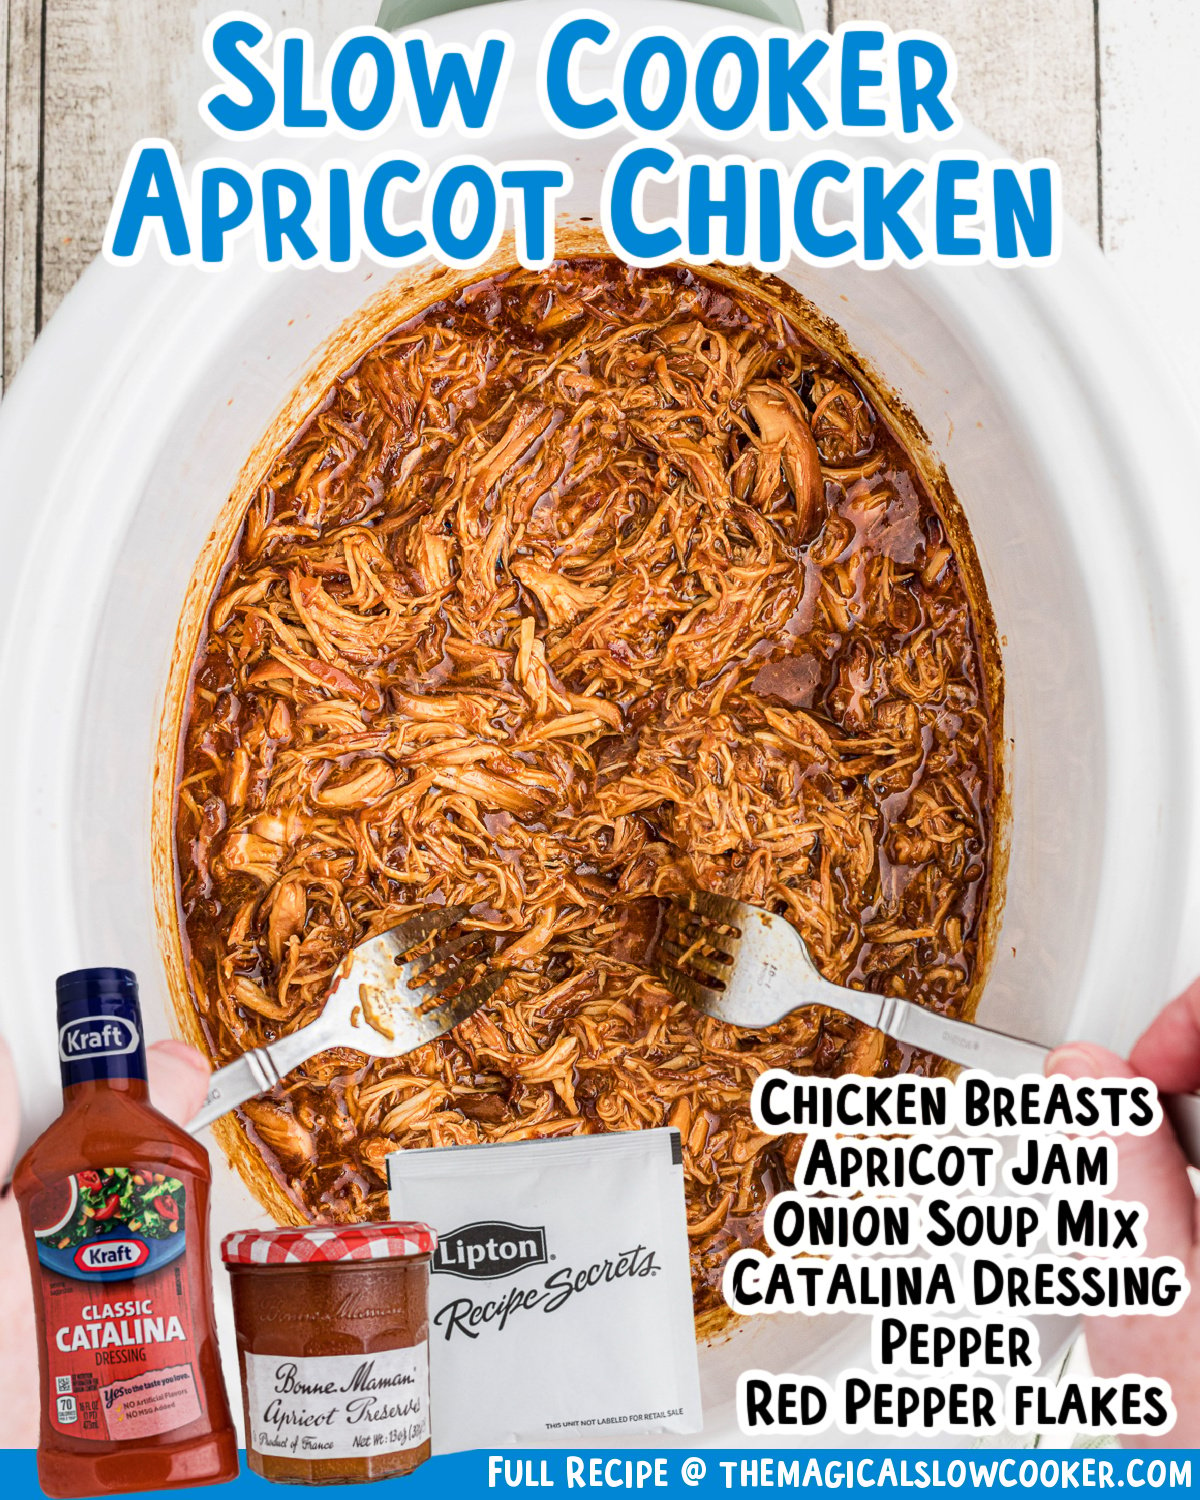 Slow Cooker Apricot Chicken - The Magical Slow Cooker